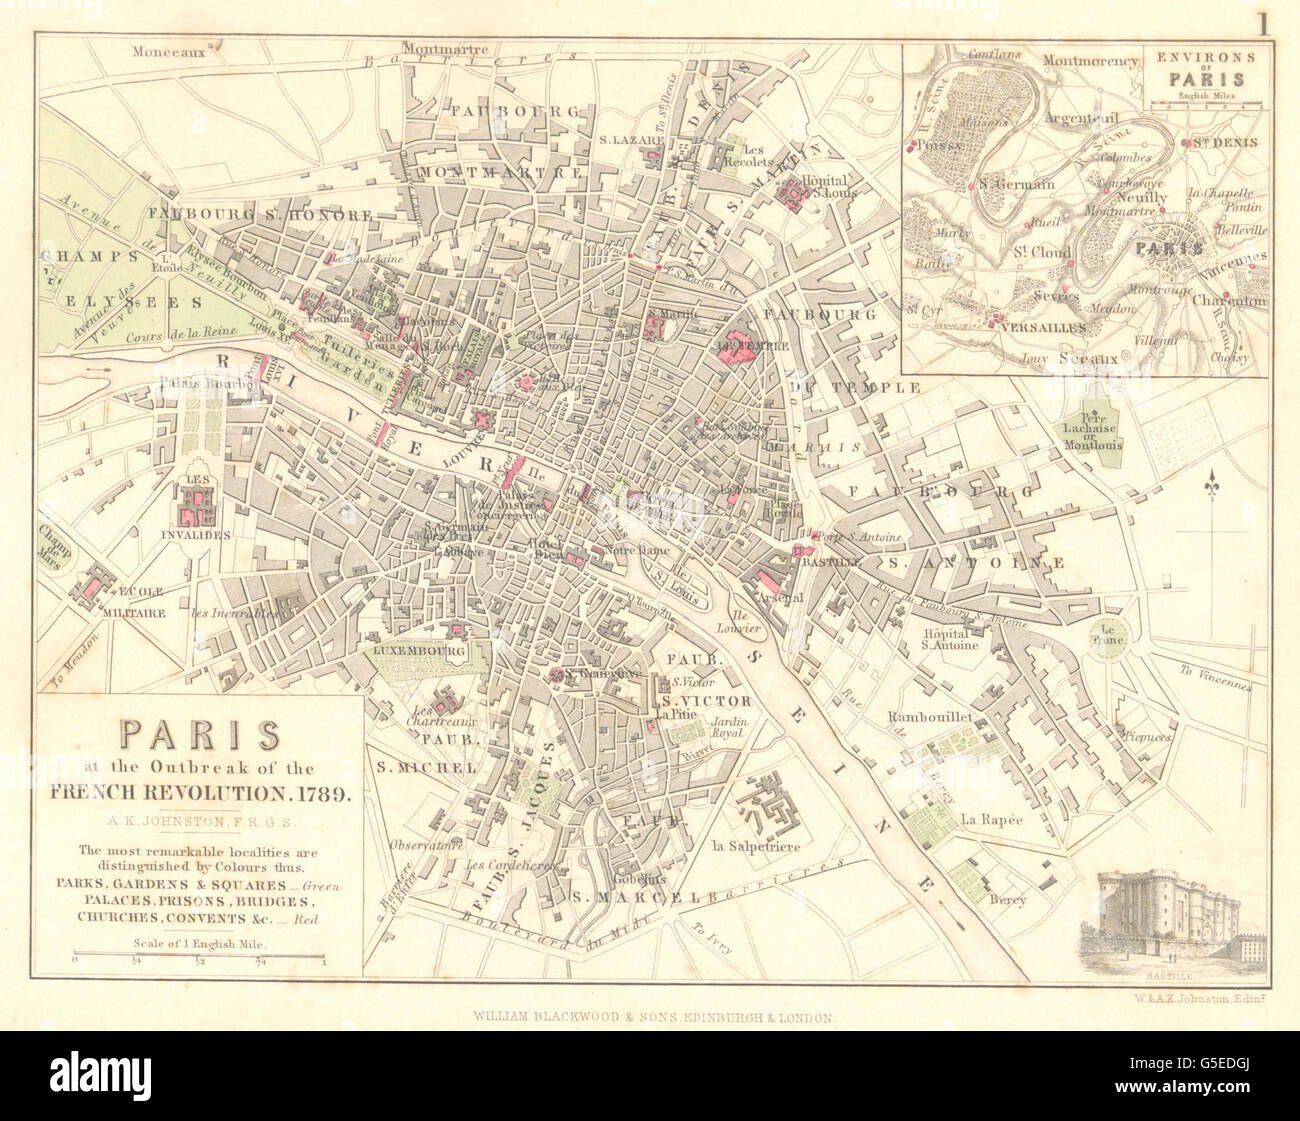 PARIS: At Outbreak of Revolution 1789. French Revolutionary Wars, 1848 old map Stock Photo